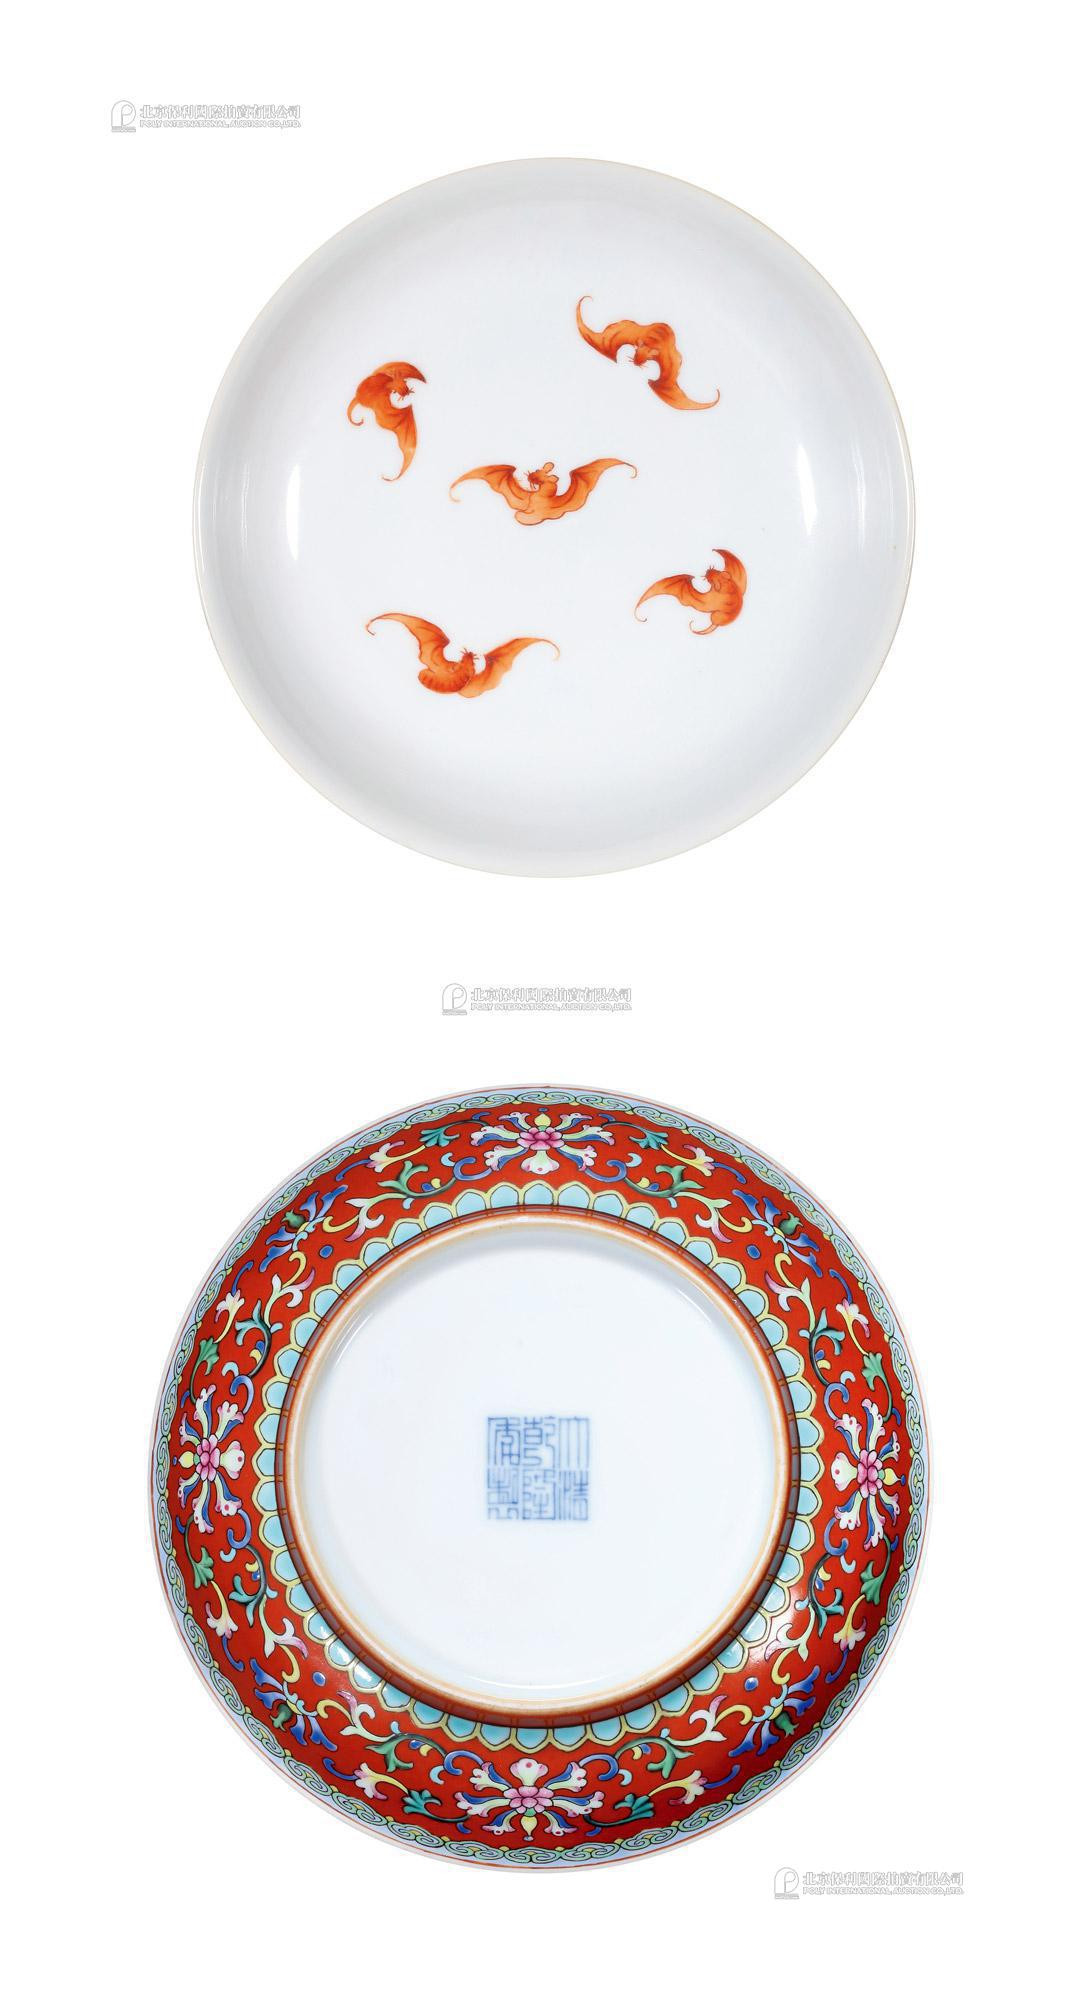 A YANG CAI PLATE WITH BATS AND FLOWERS DESIGN